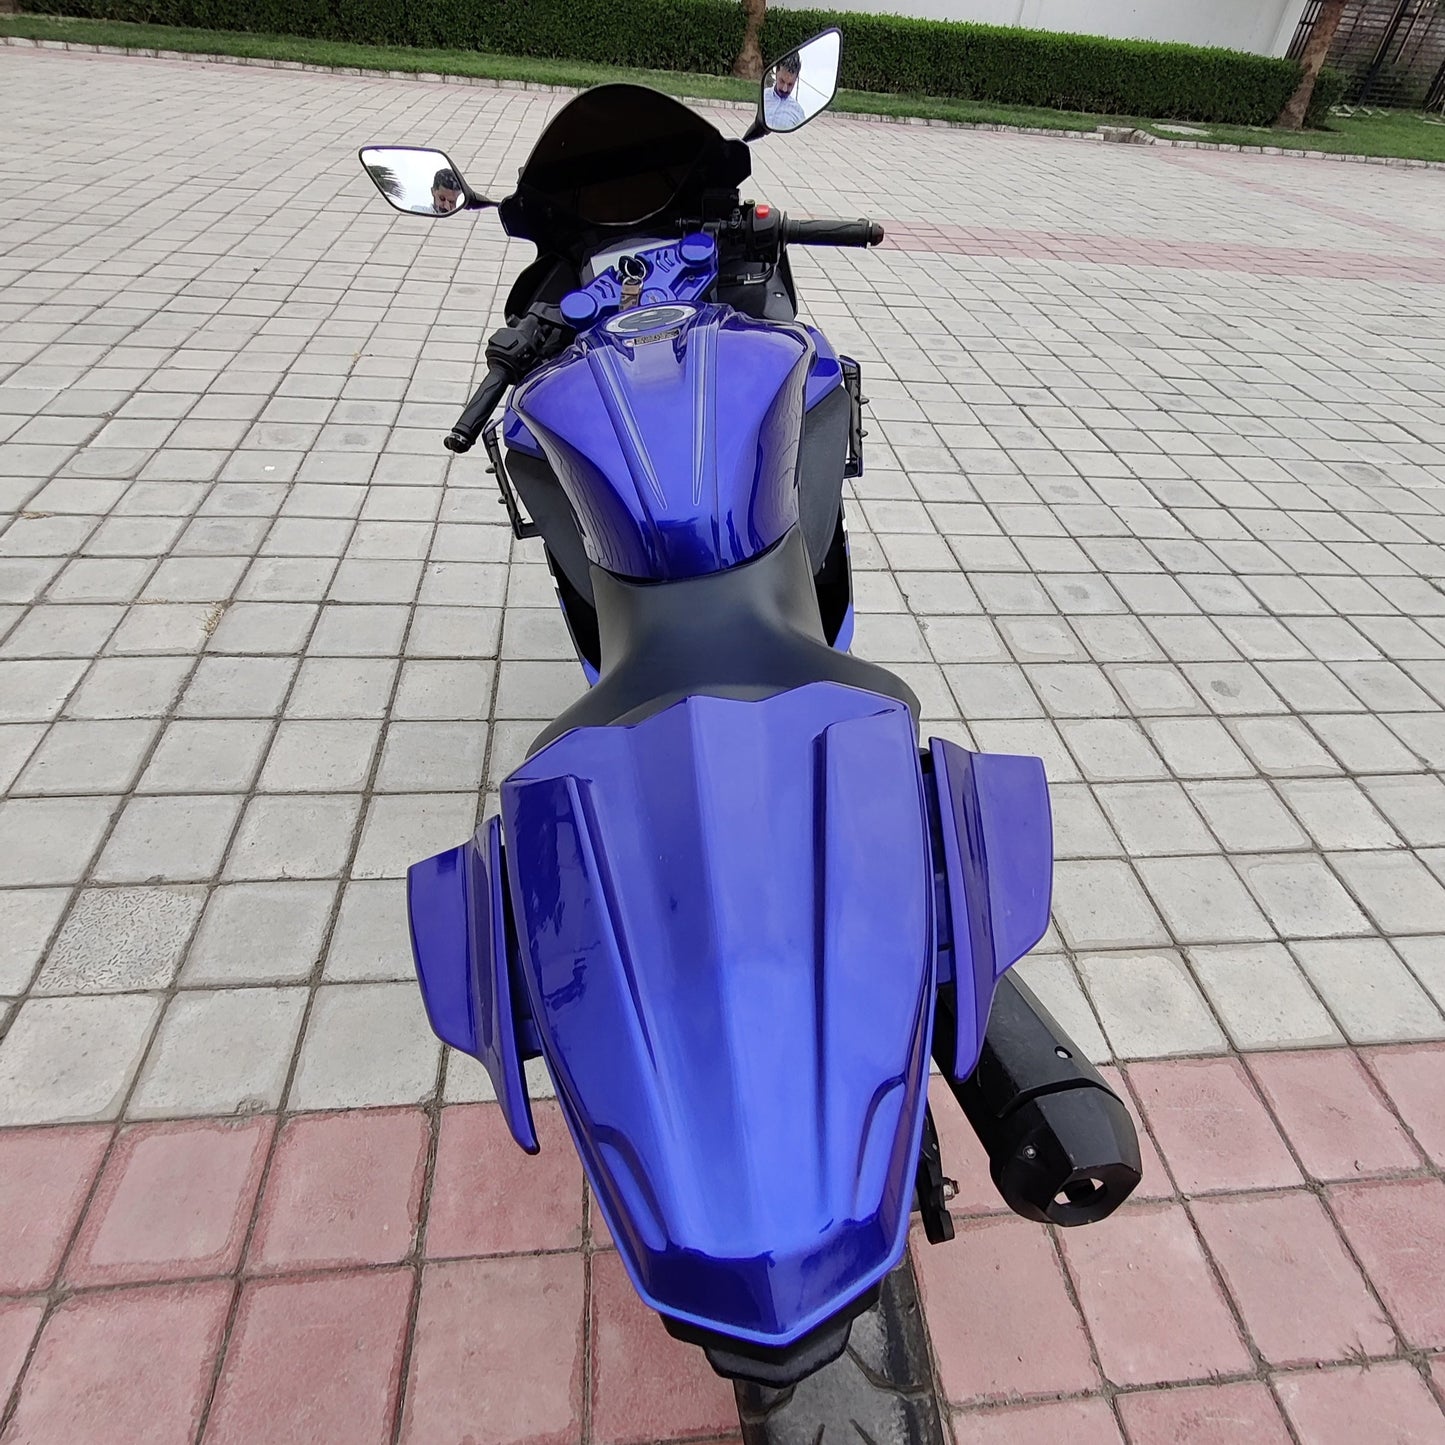 Yamaha R15 V3 Accessories | Modified R15v3 | Best R15 Modification | Saiga Parts Seat Cowl